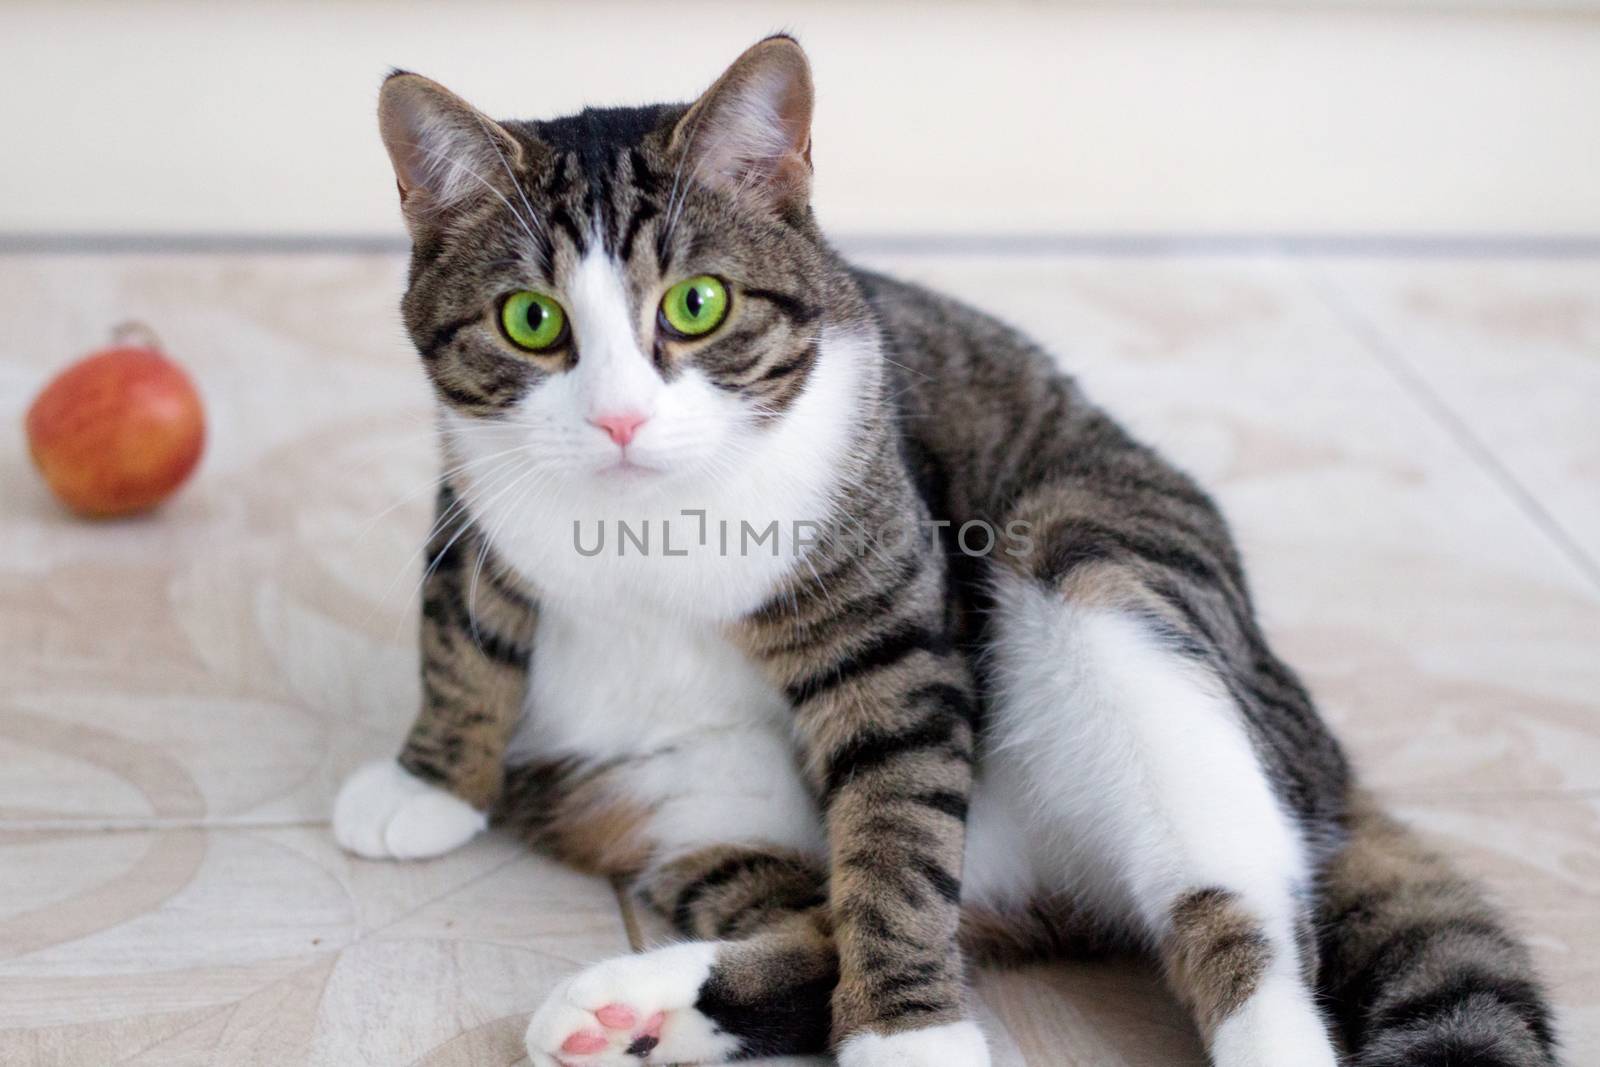 Domestic pet cat with bright green eyes watches cautiously and intently